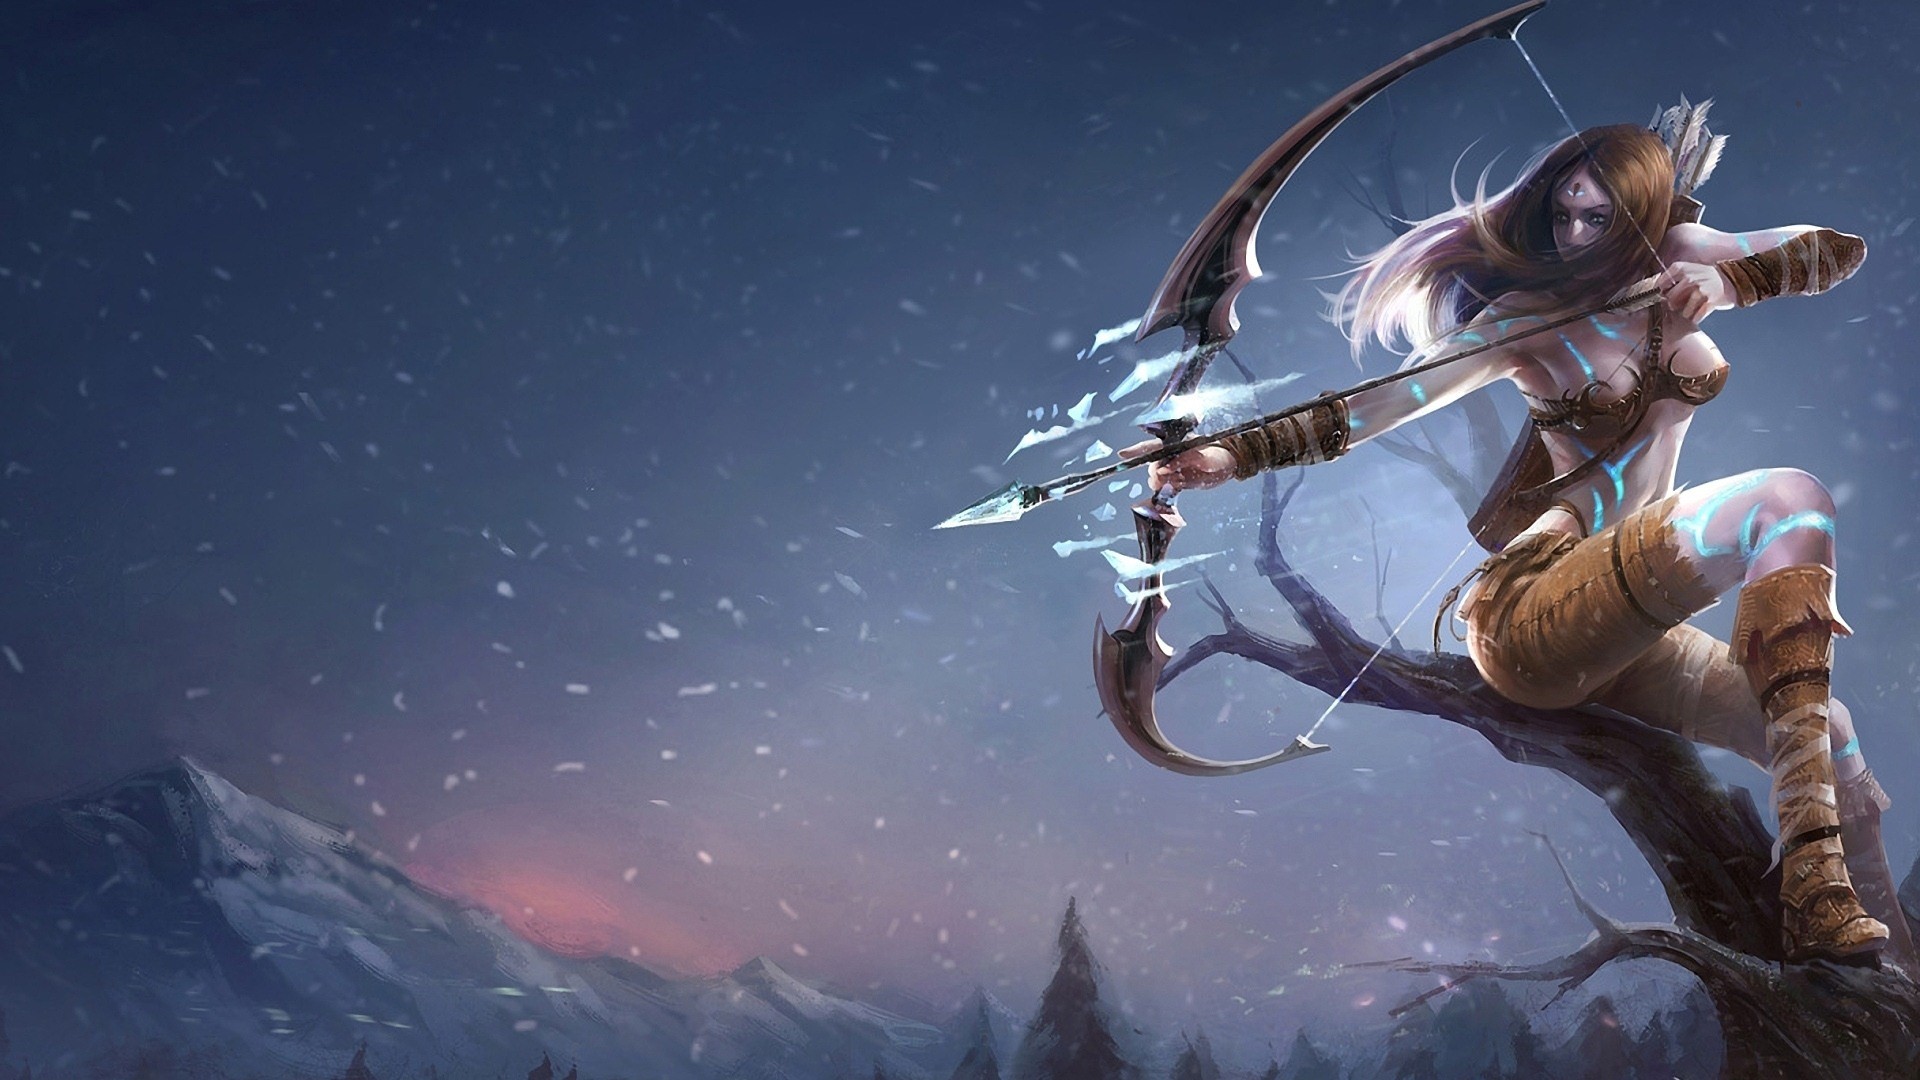 1920x1080 http://www.rebgaming.com/wp-content/uploads/2013/05/league-of-legends- wallpaper-34.jpg | Bows~n~Arrows | Pinterest | League legends, Cosplay and  Anime